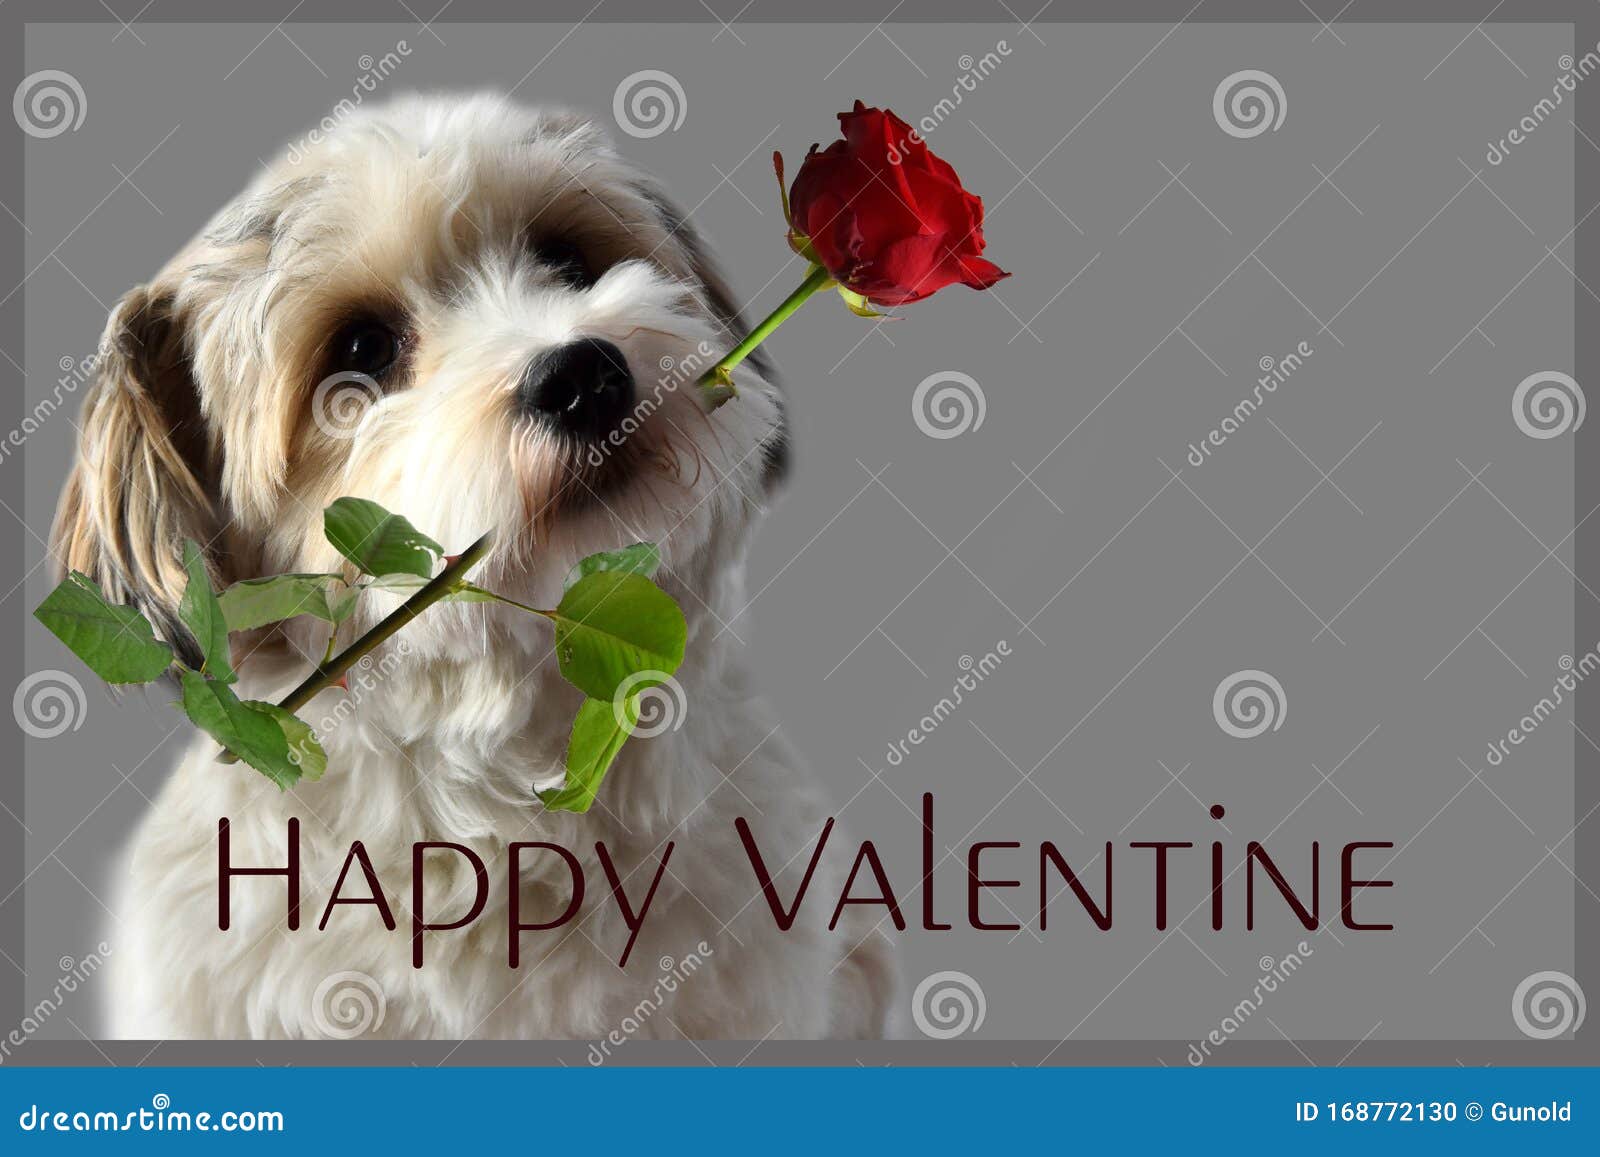 happy valentine. havanese puppy with rose in his snout